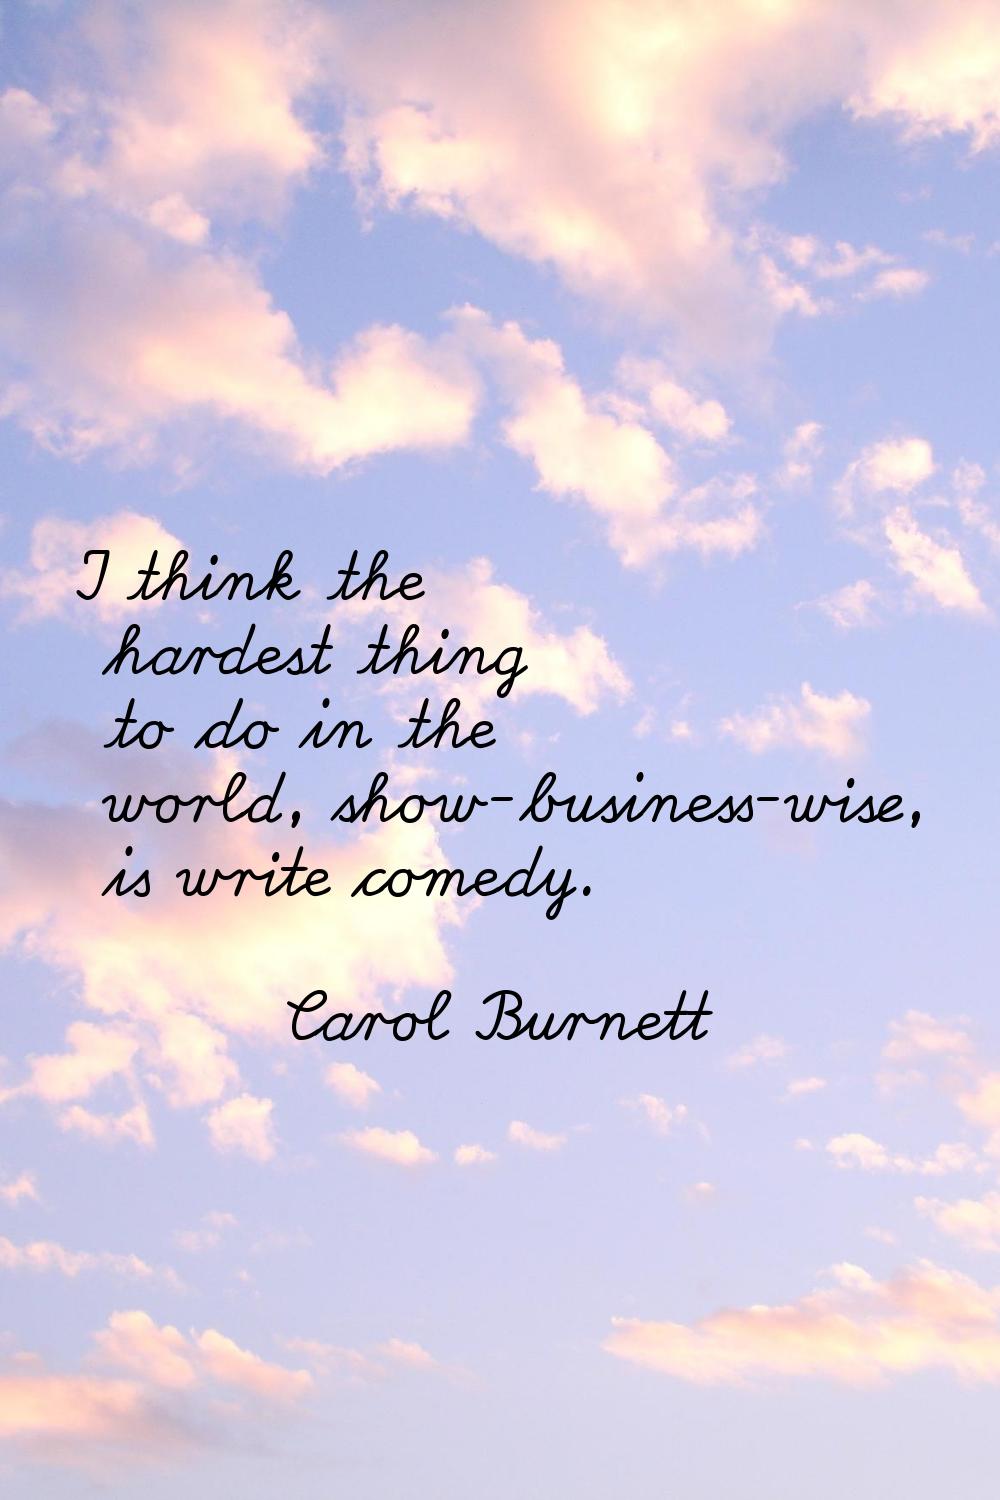 I think the hardest thing to do in the world, show-business-wise, is write comedy.